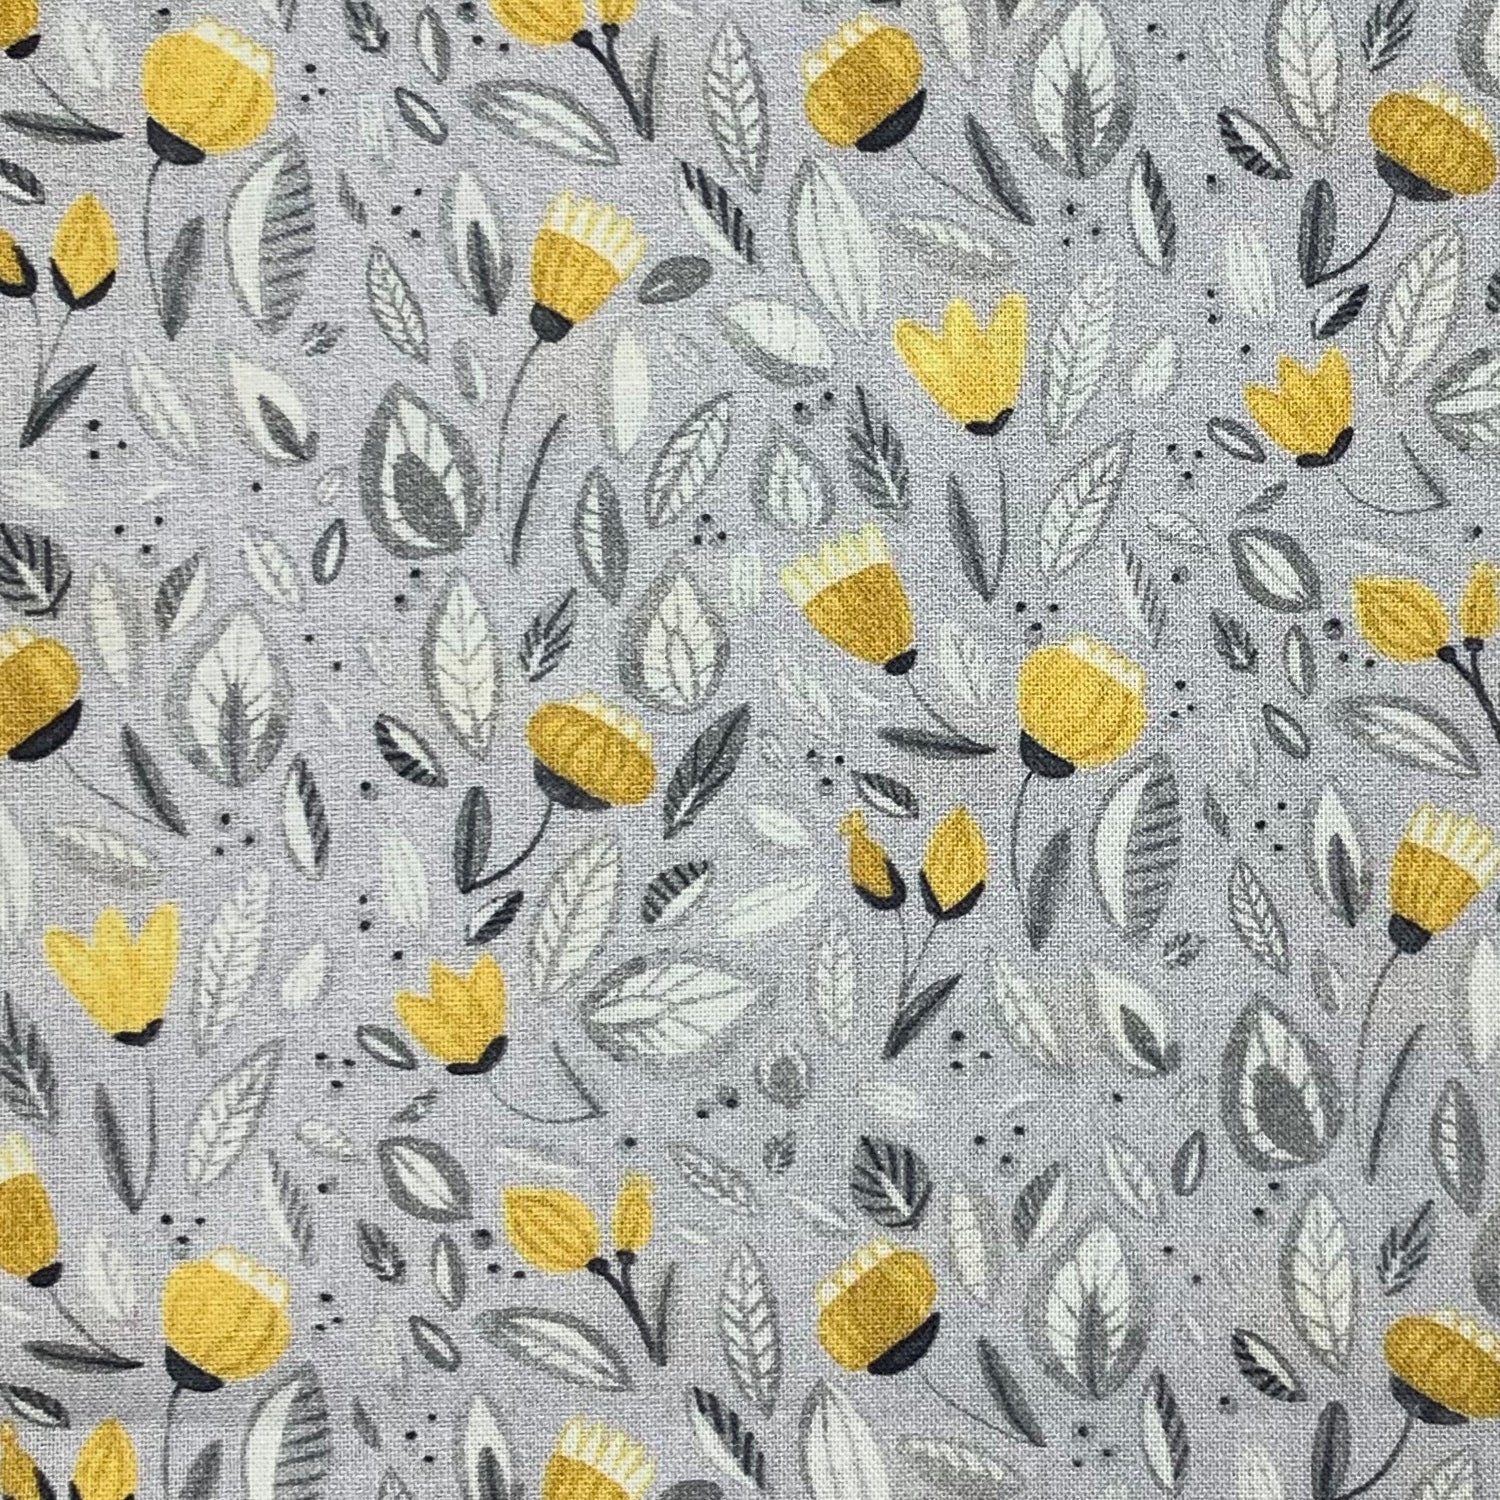 Triple layered face mask made in Melbourne Australia from cotton and poplin featuring a unique pollen wattle flower print